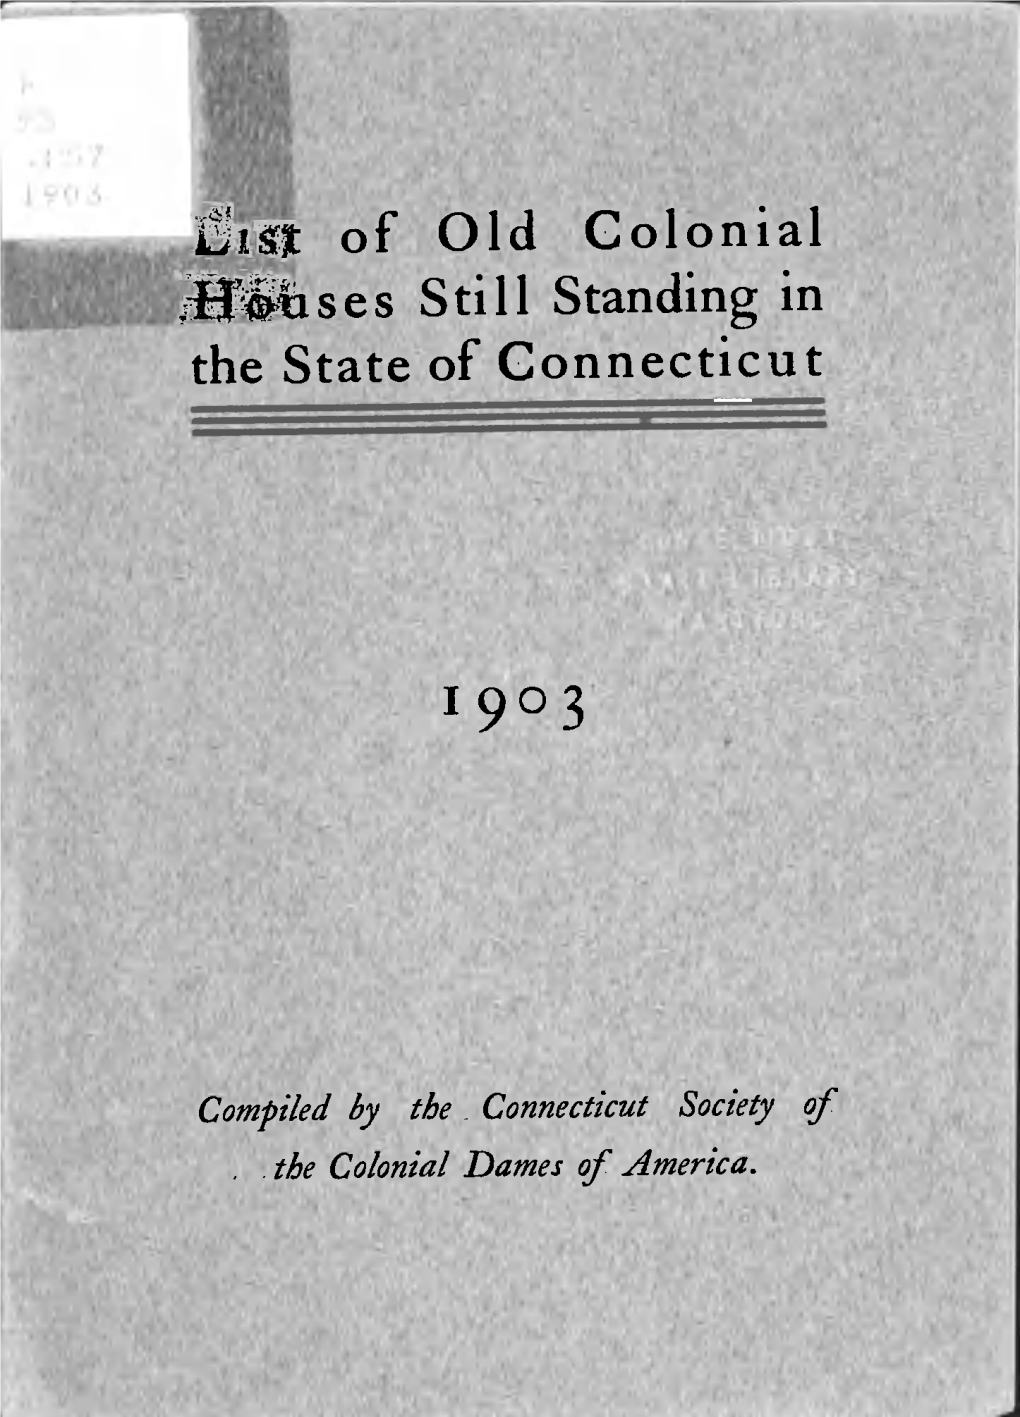 Zi&T of Old Colonial ®Siises Still Standing in the State of Connecticut